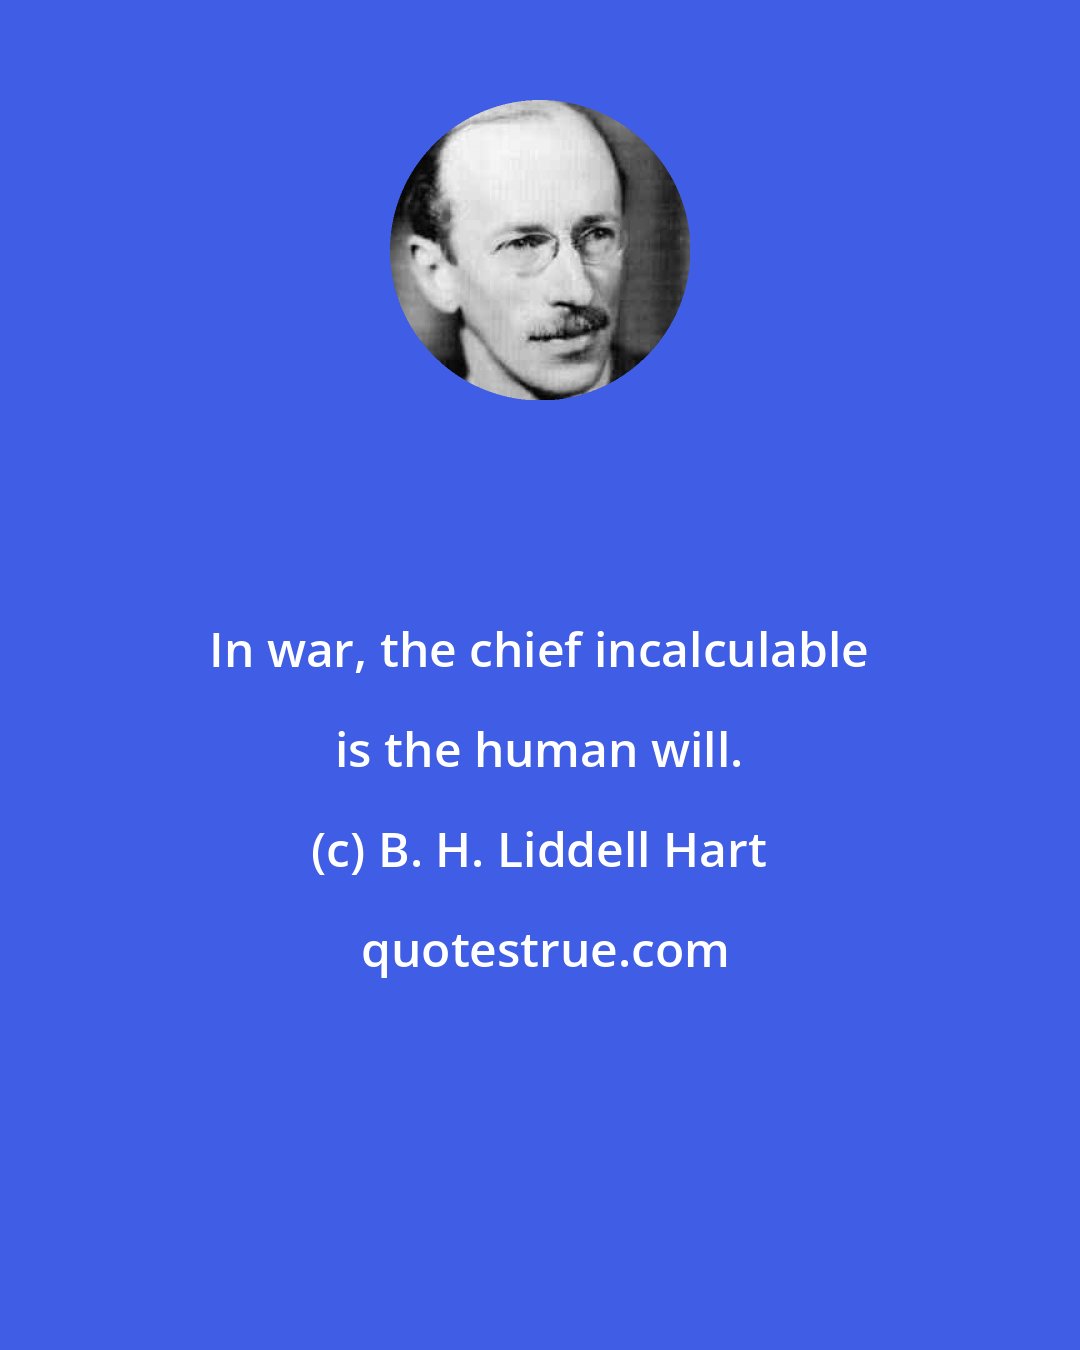 B. H. Liddell Hart: In war, the chief incalculable is the human will.